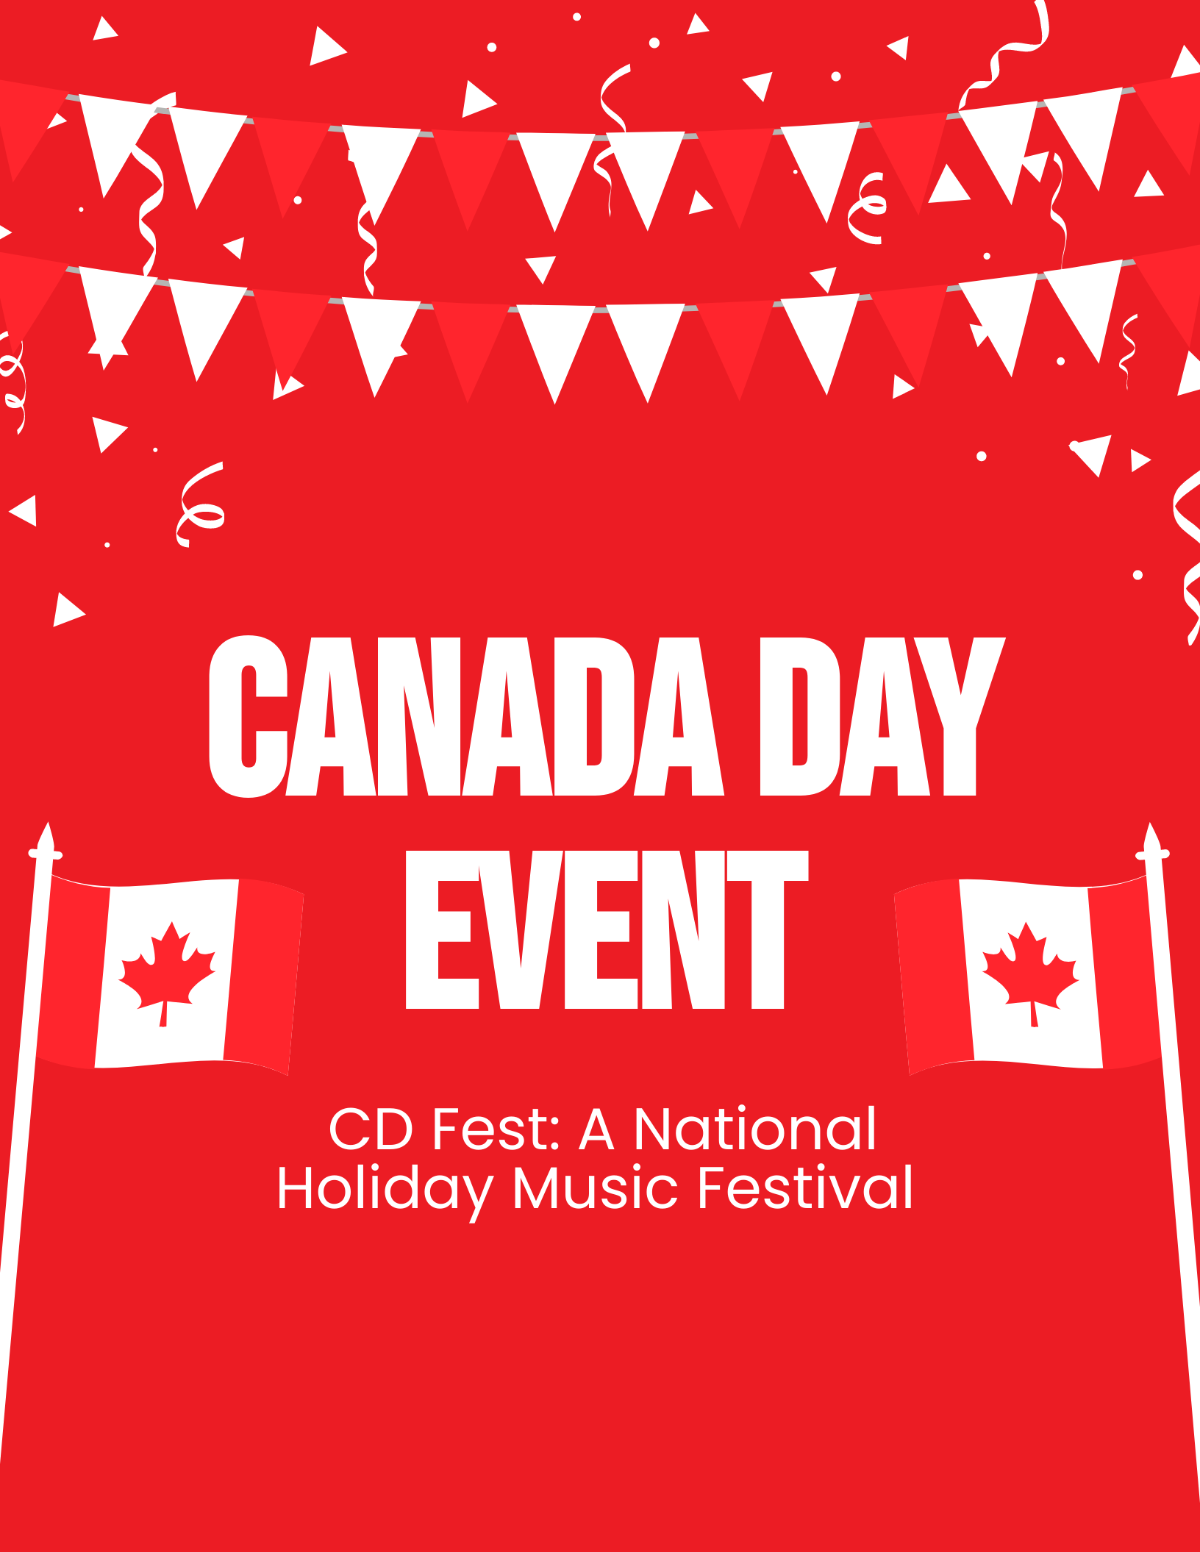 Canada Day Event Flyer Template